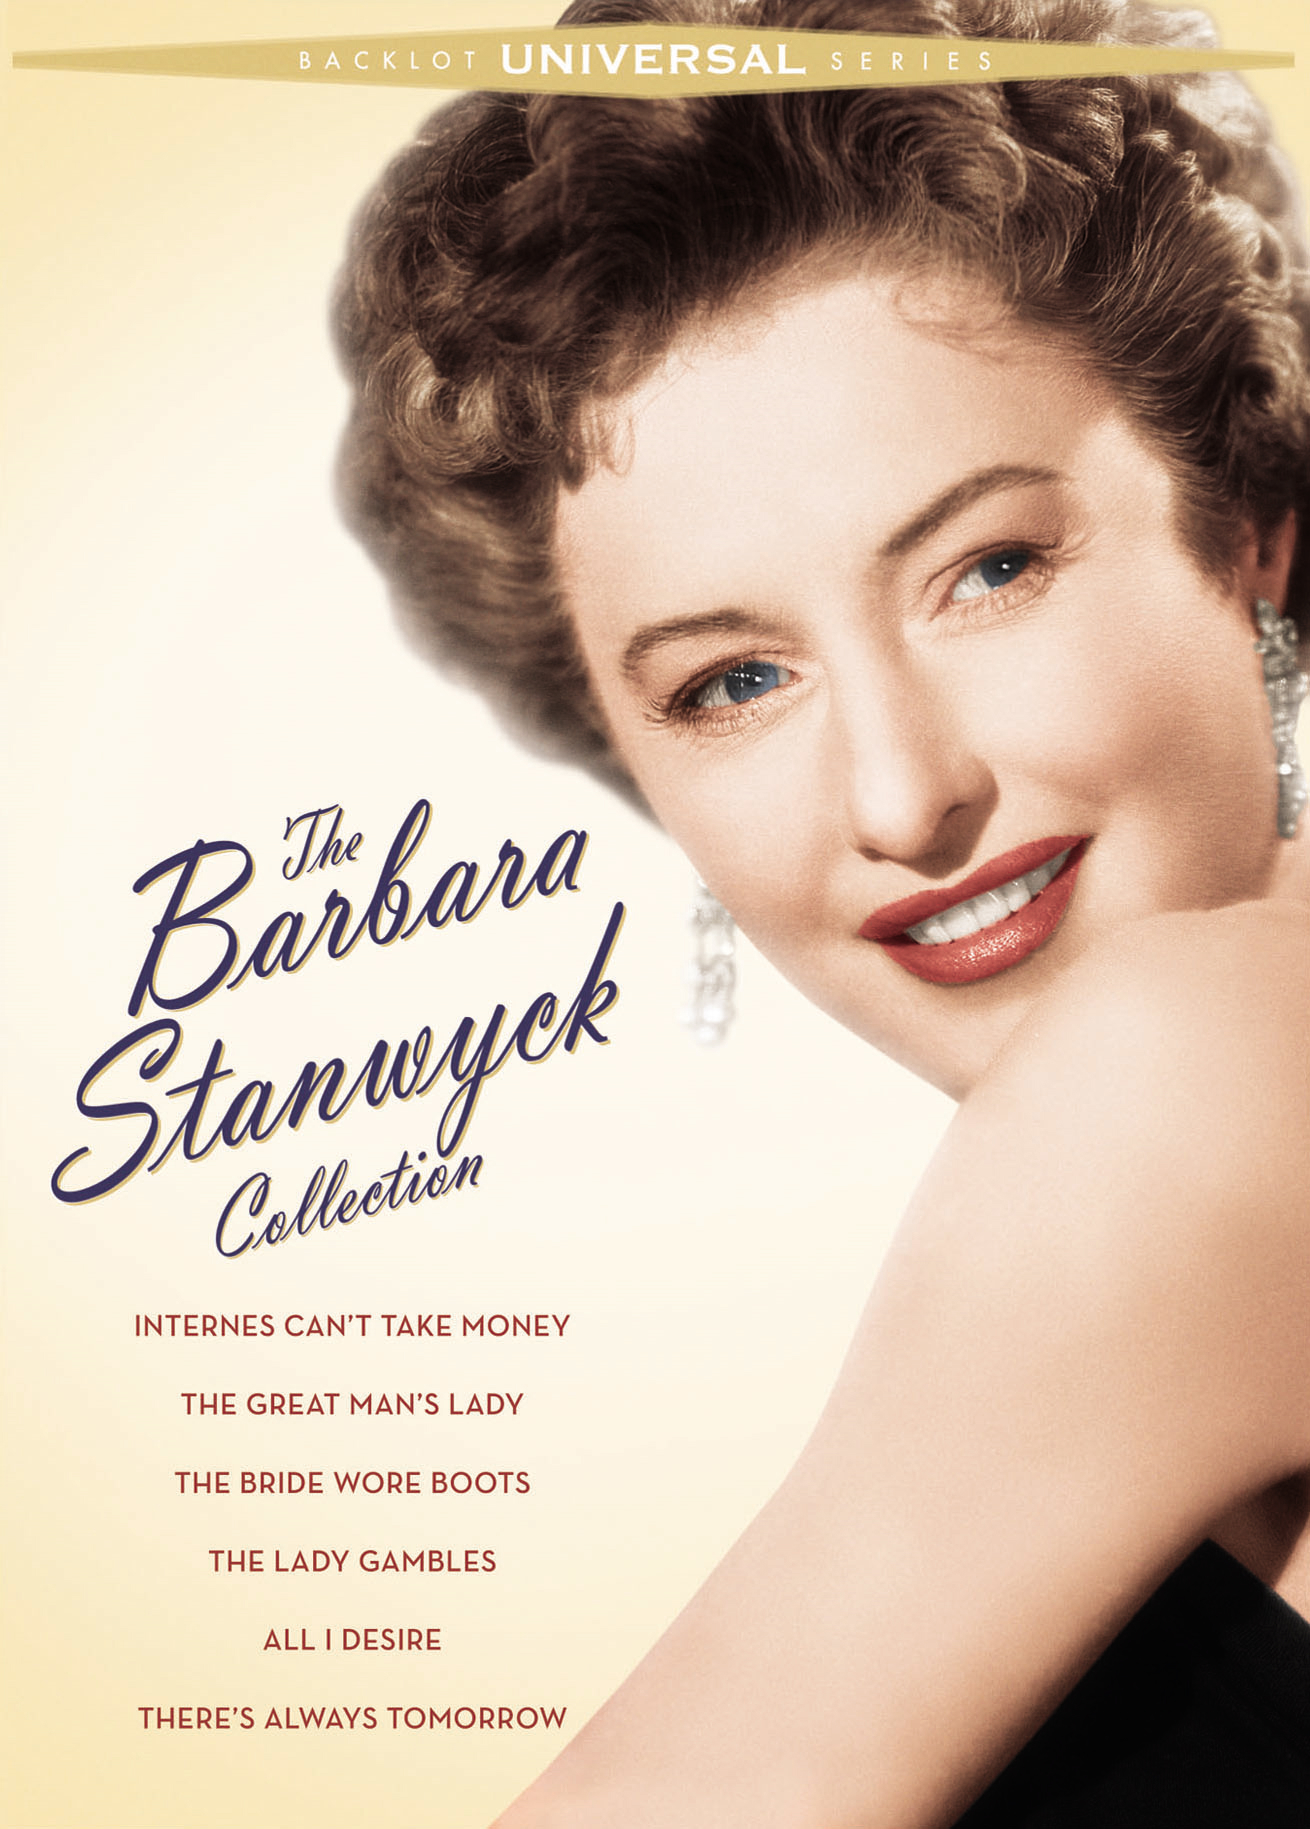 The Barbara Stanwyck Collection (DVD Set) - DVD [ 1946 ]  - Classic Movies On DVD - Movies On GRUV